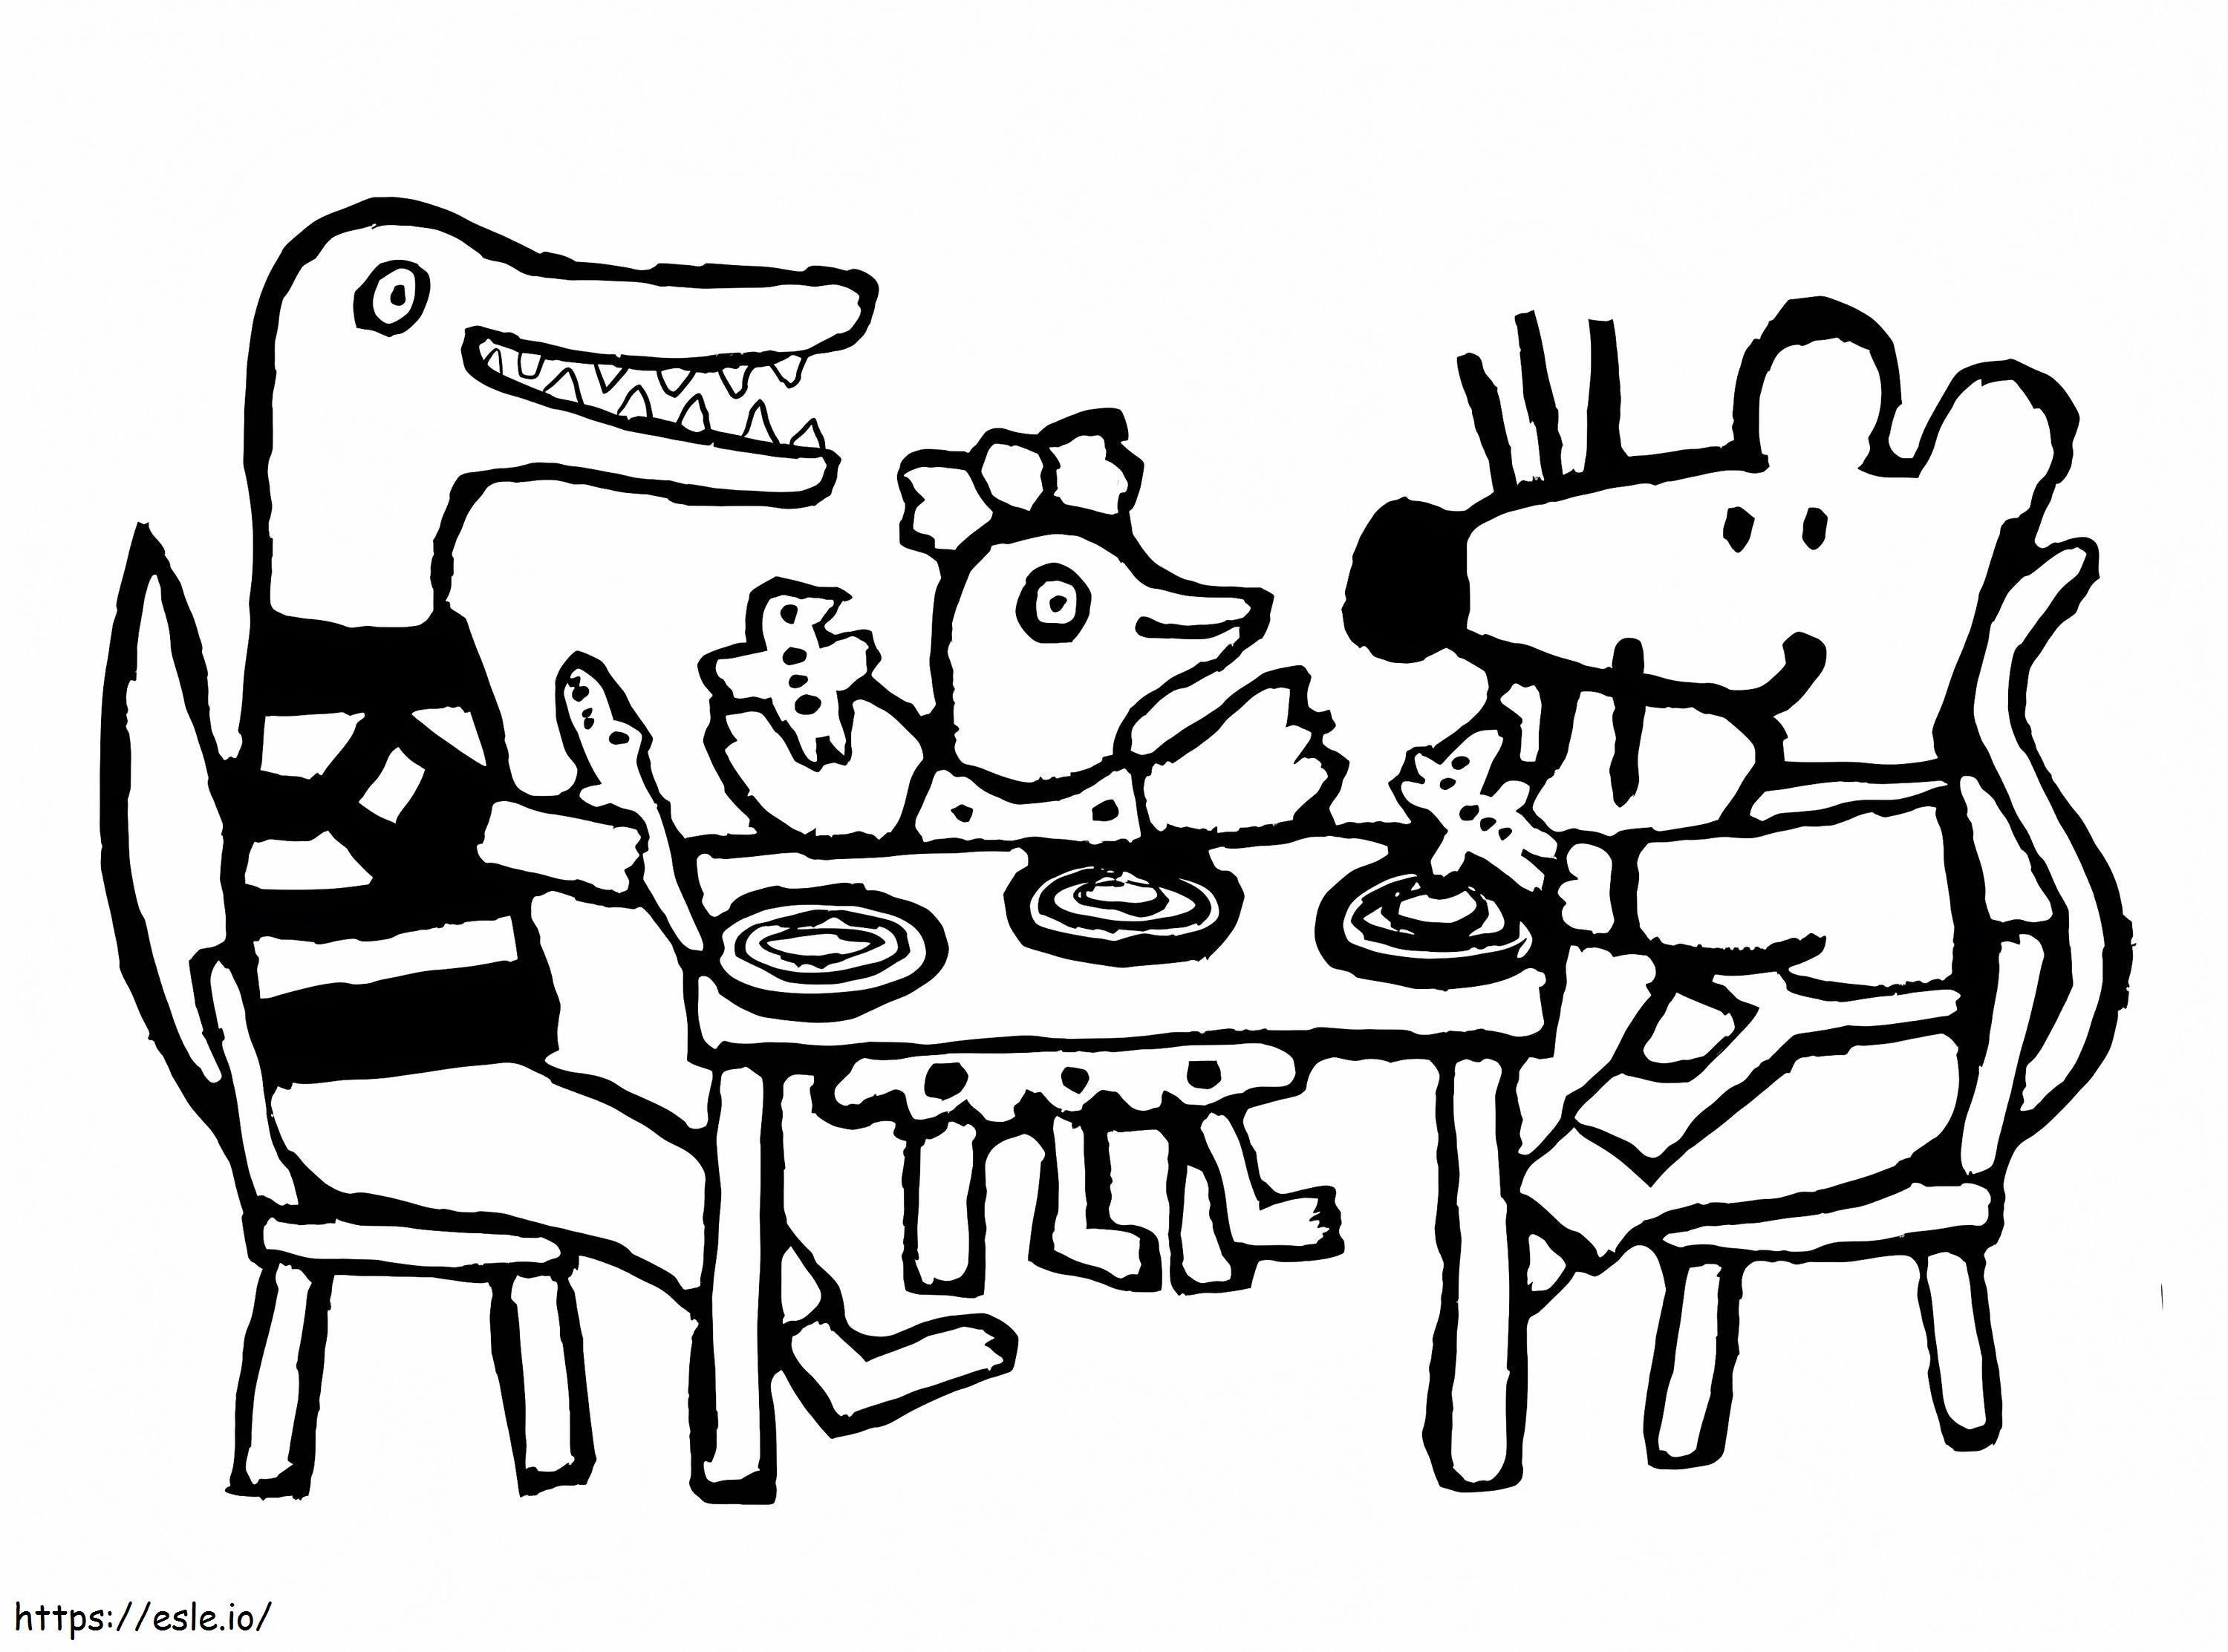 Maisy And Friends coloring page